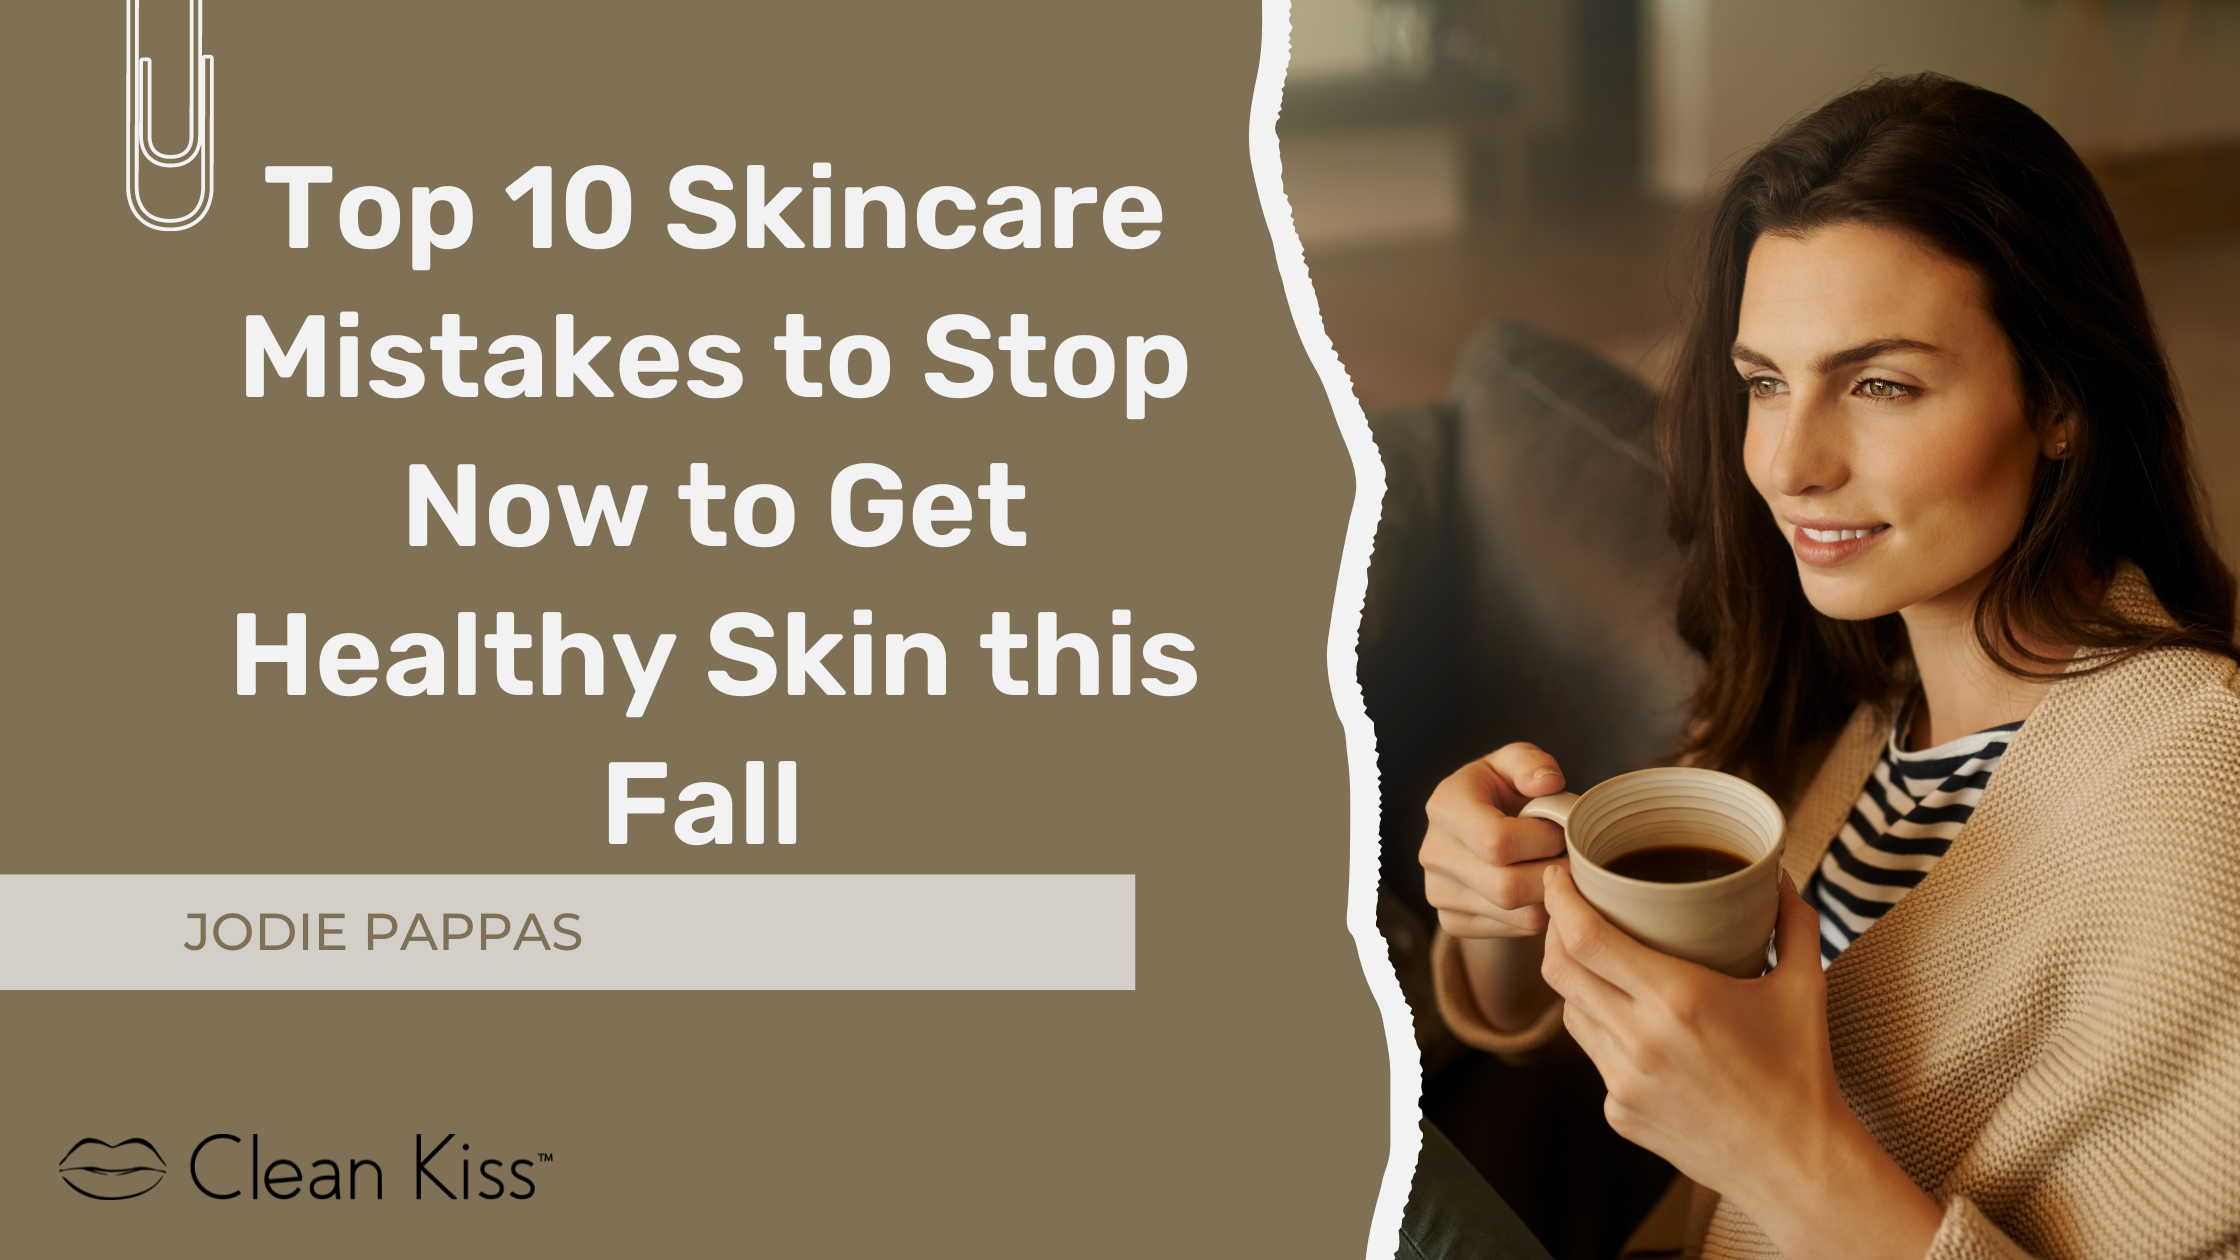 Top 10 Skincare Mistakes to Stop Now to Get Healthy Skin this Fall